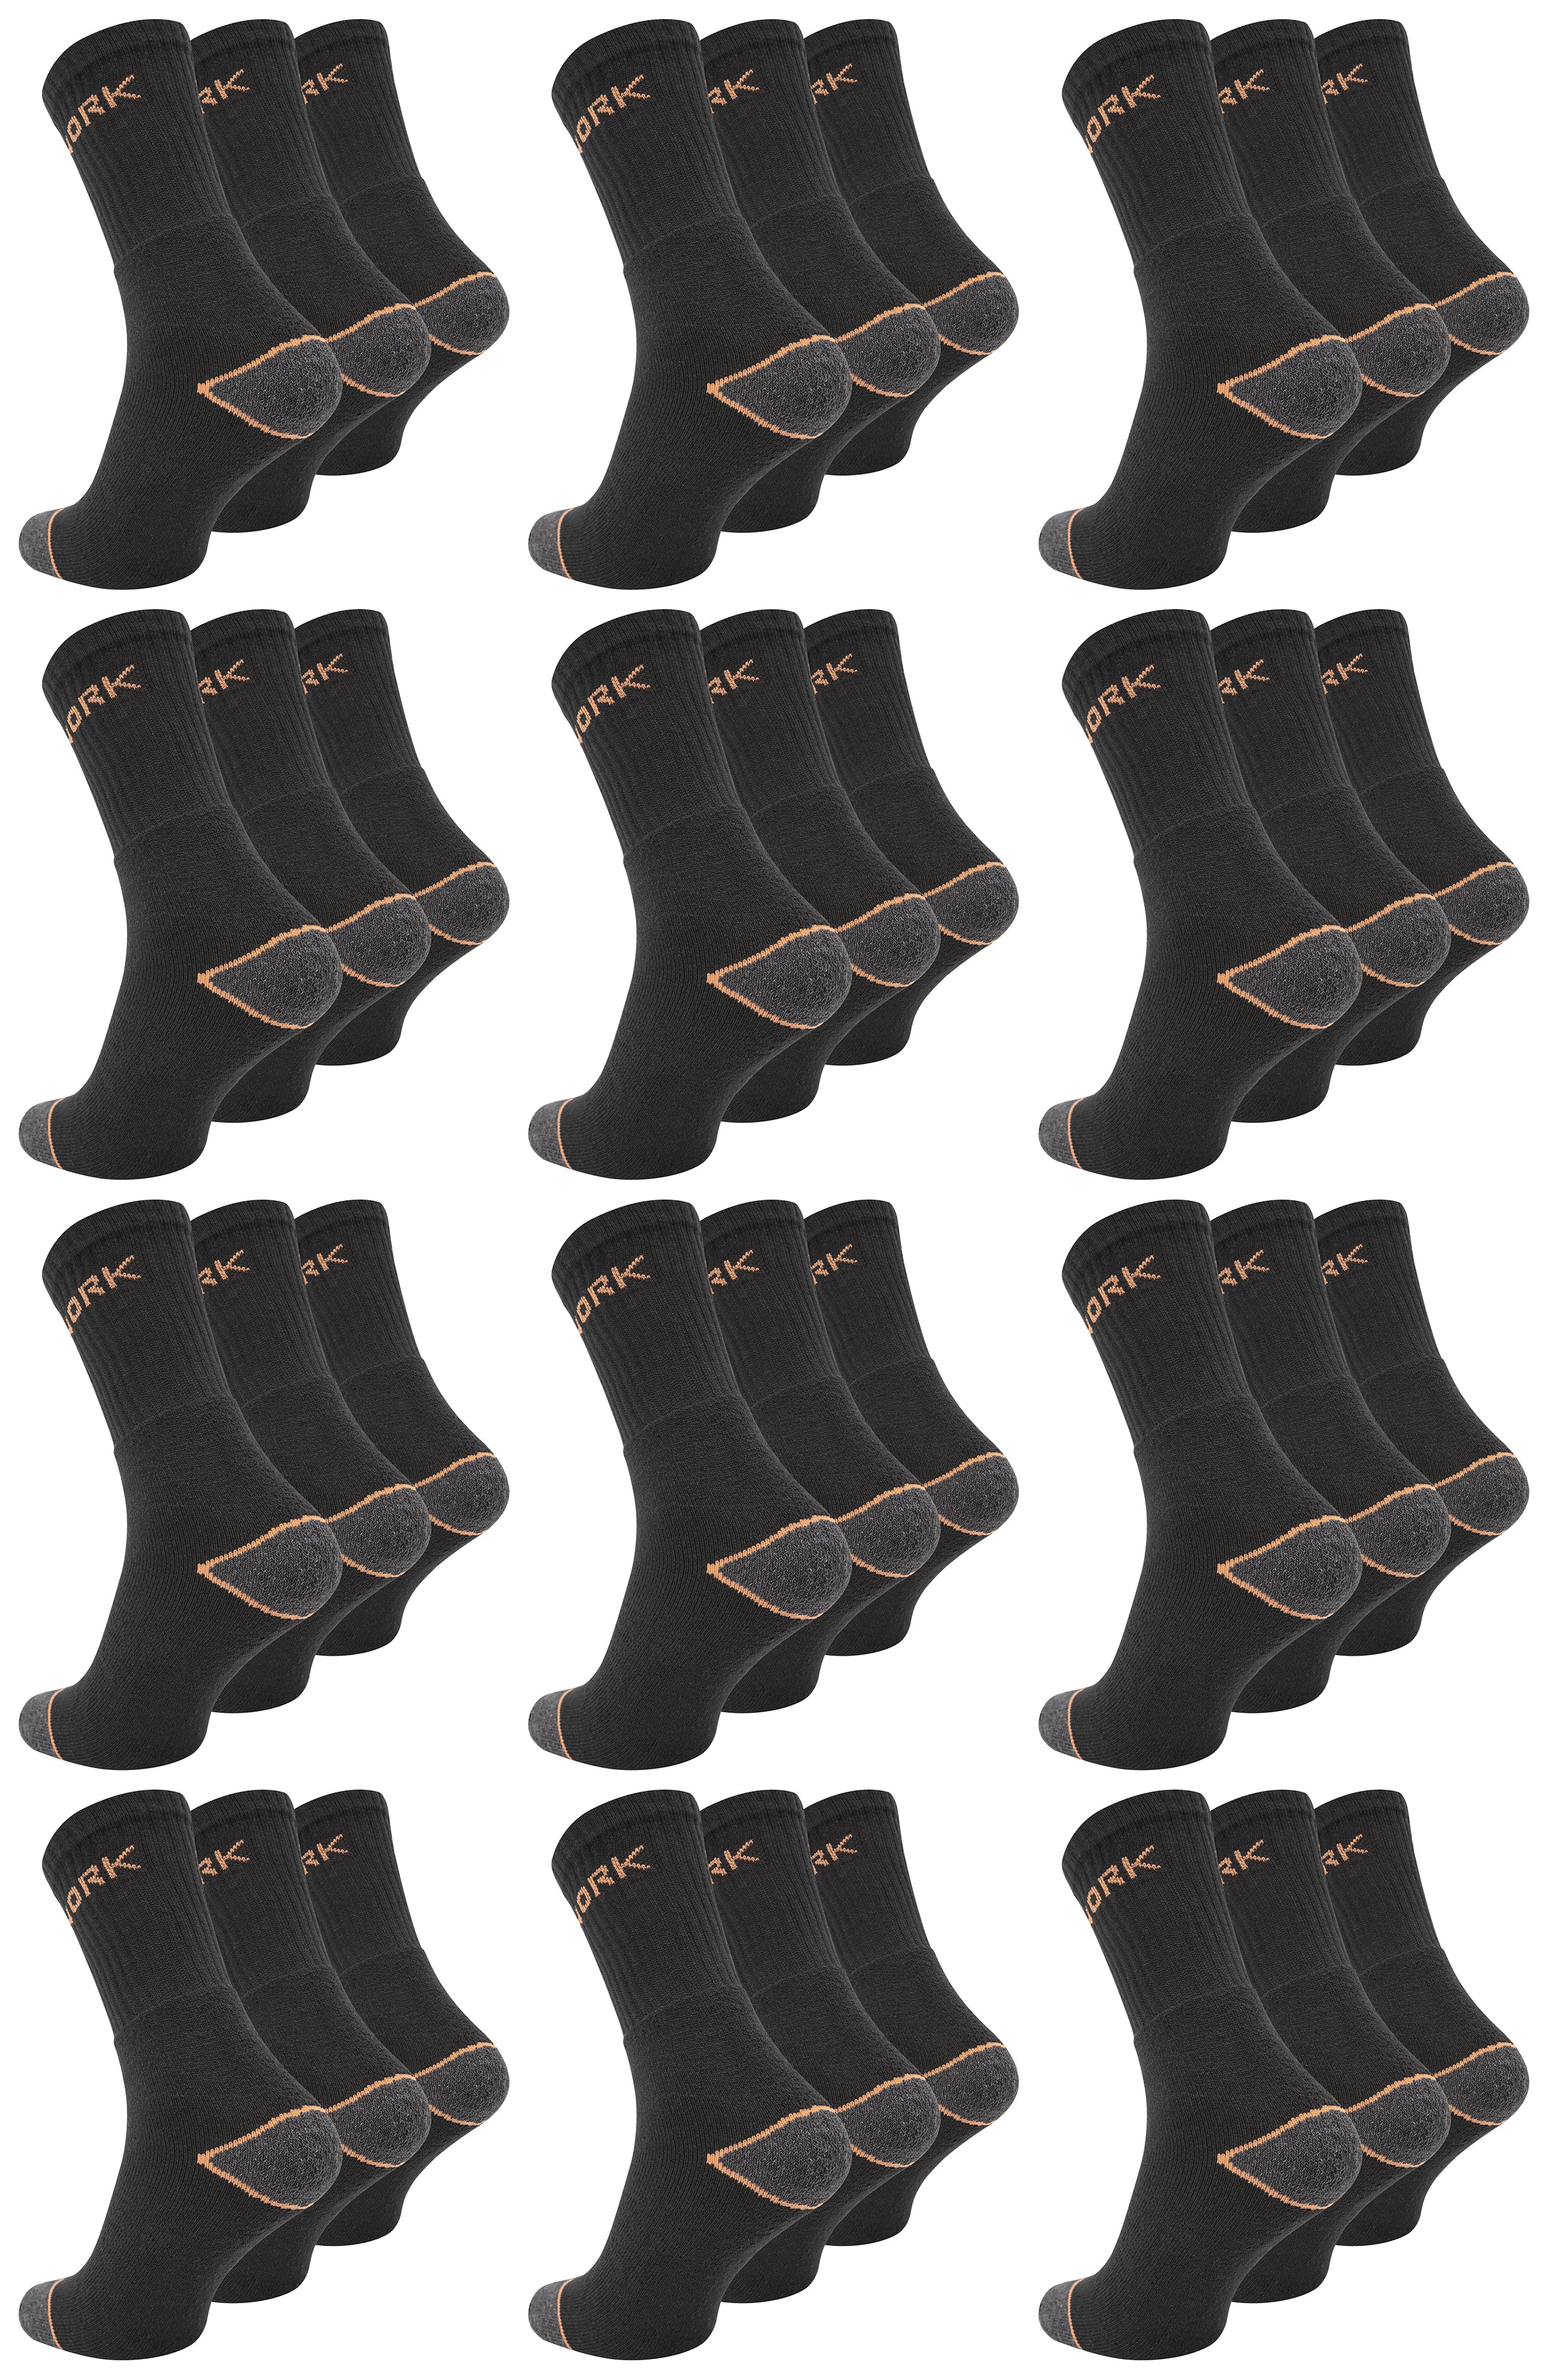 work 36 - sizes – socks and 39/42 Paolo pairs 43/46 3/6/12/18 Renzo® Traumpreisfabrik or